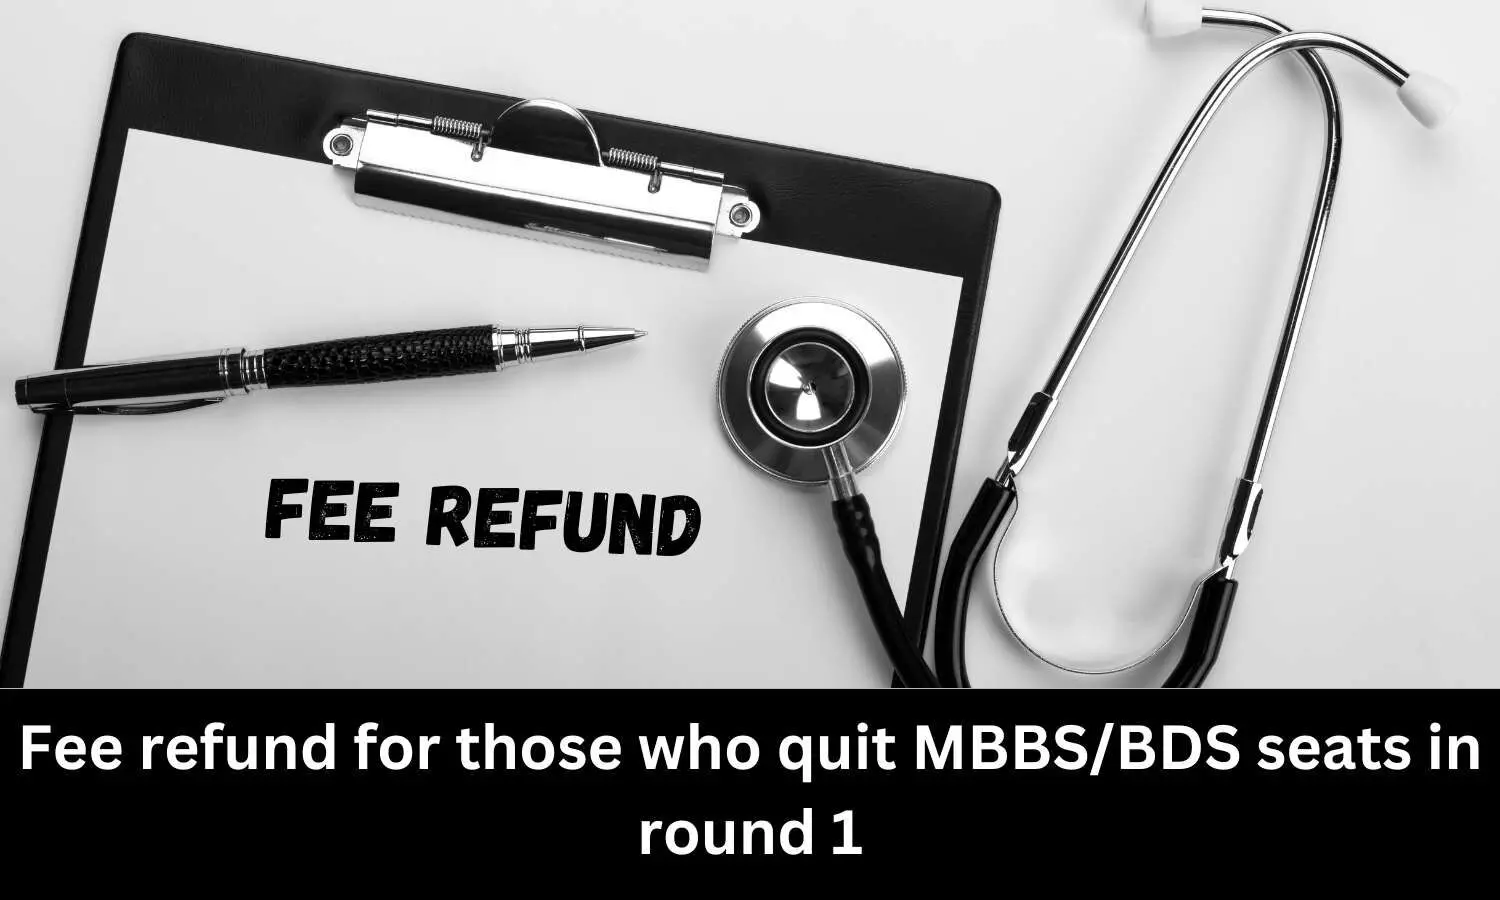 Fee refund for those who quit MBBS/BDS seats in round 1